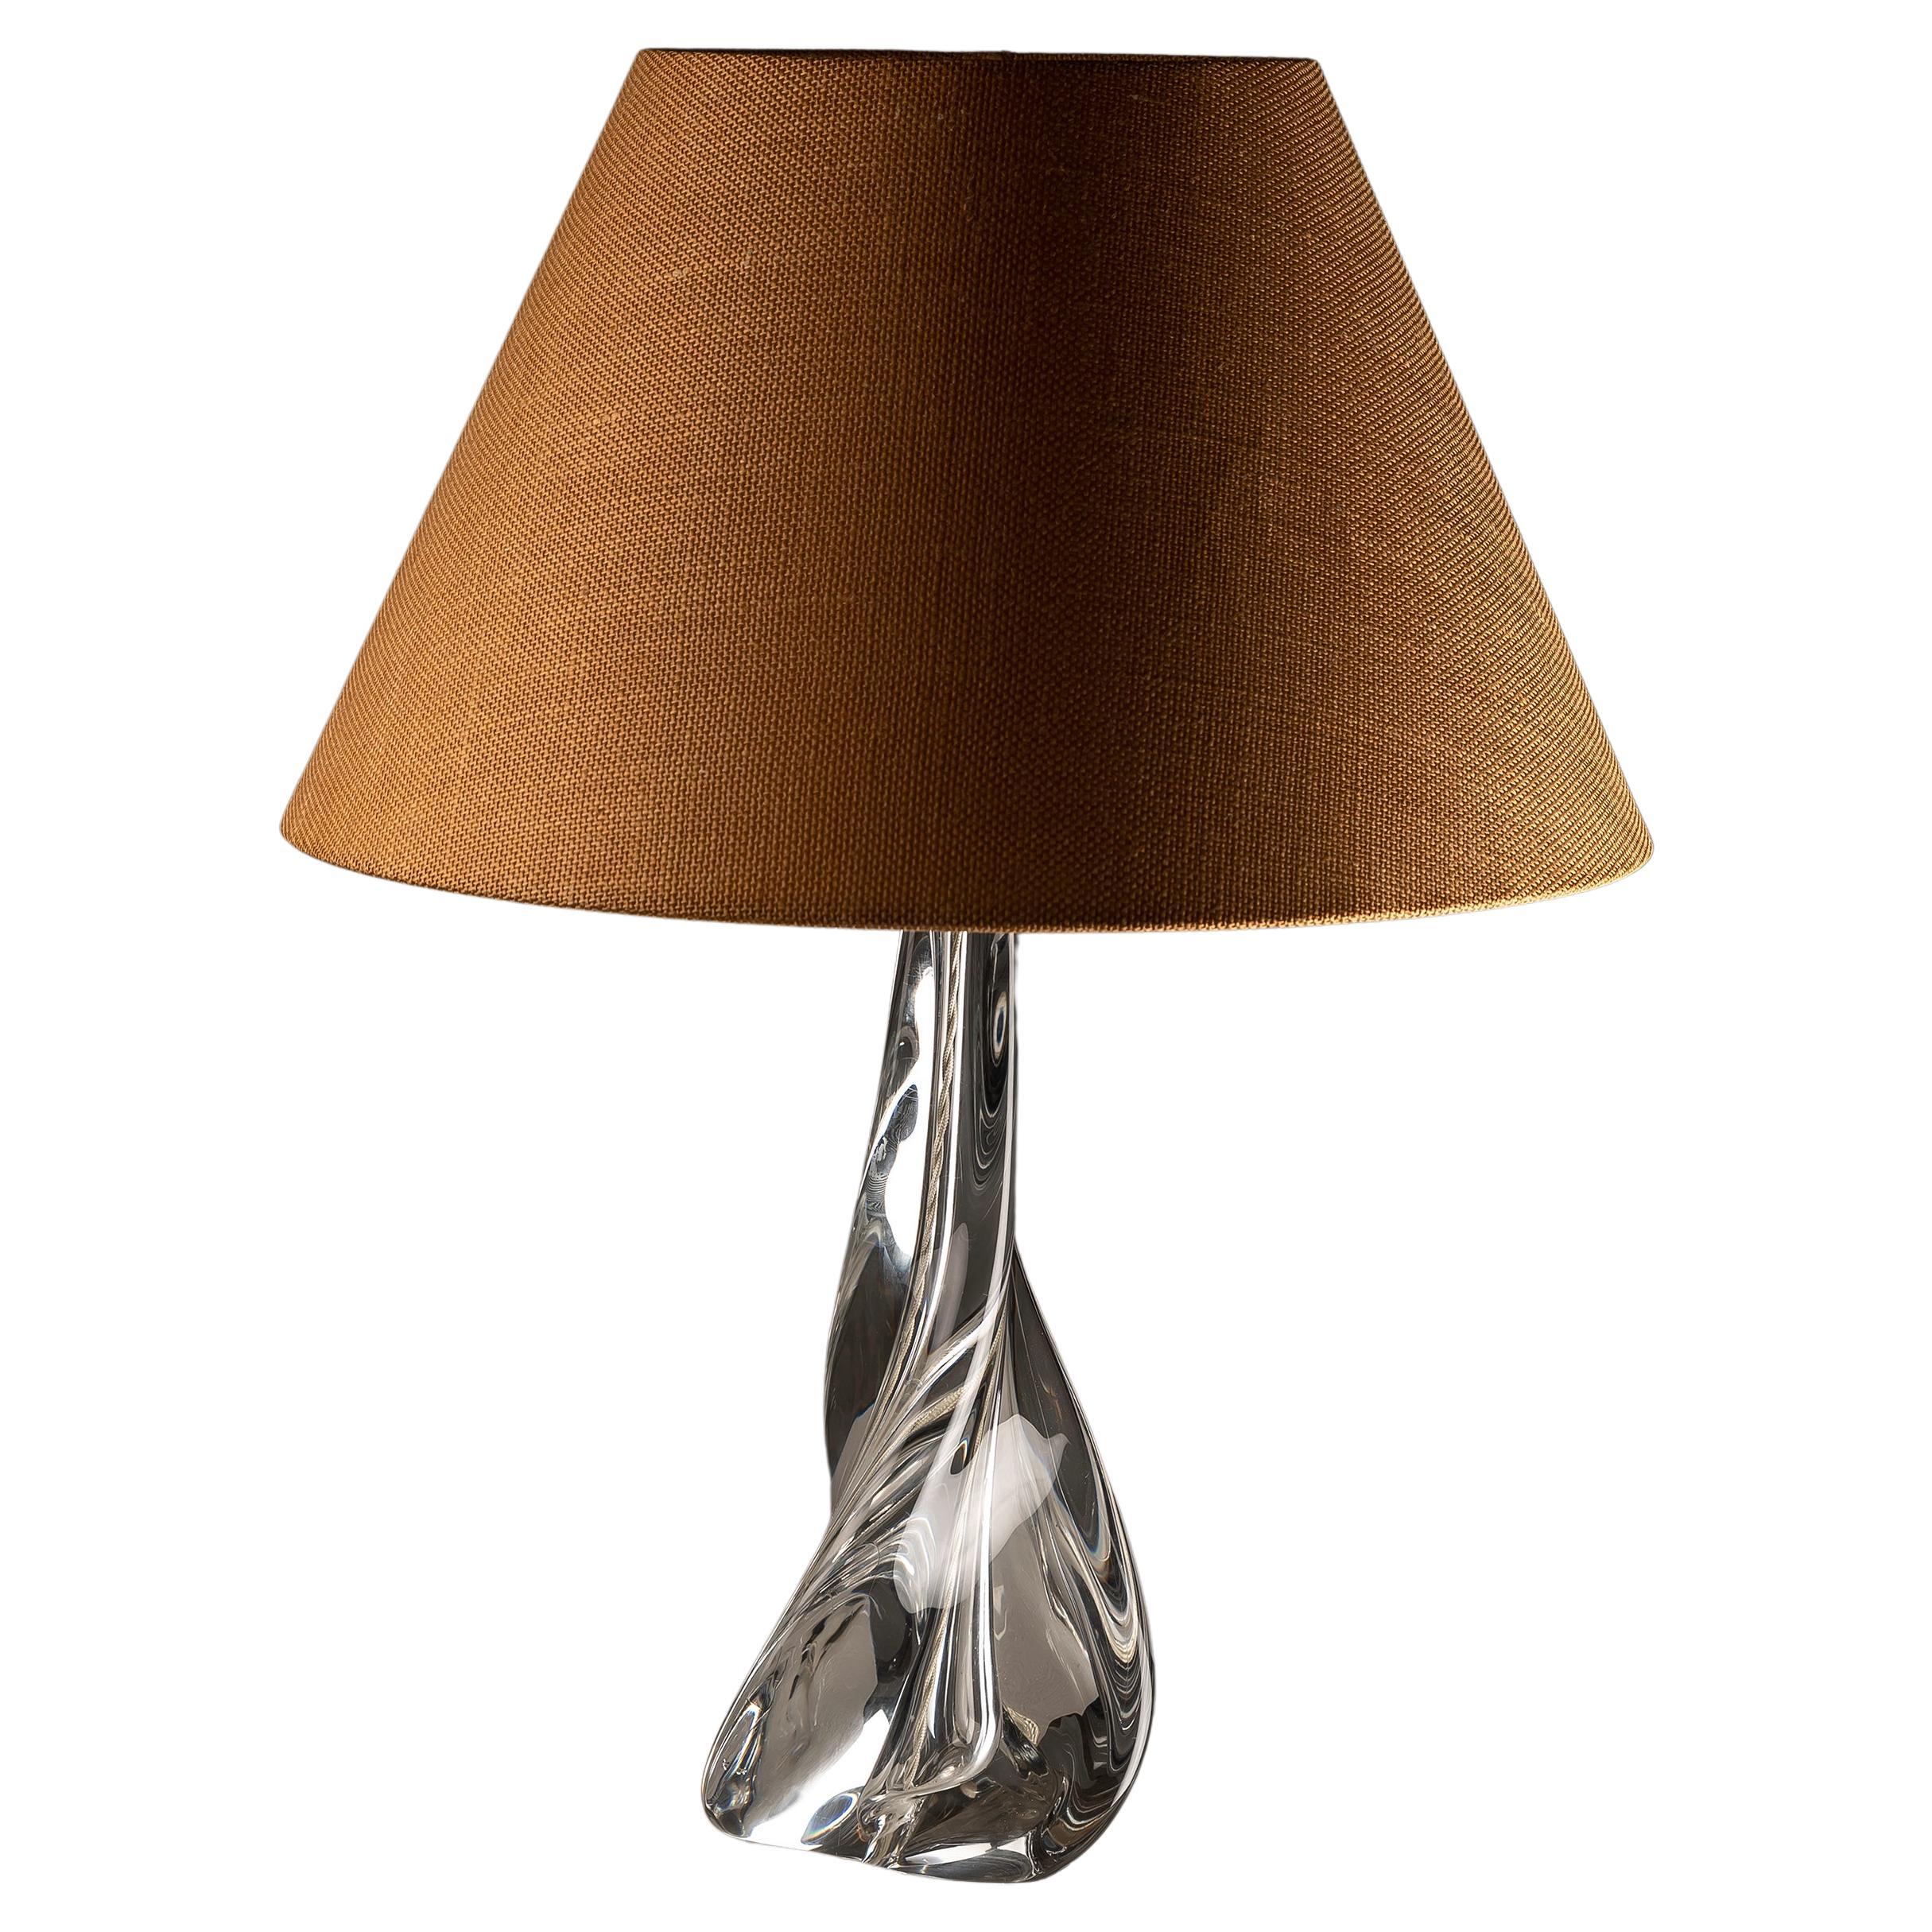 A French Twisted Crystal table lamp by Saint Louis 1950s